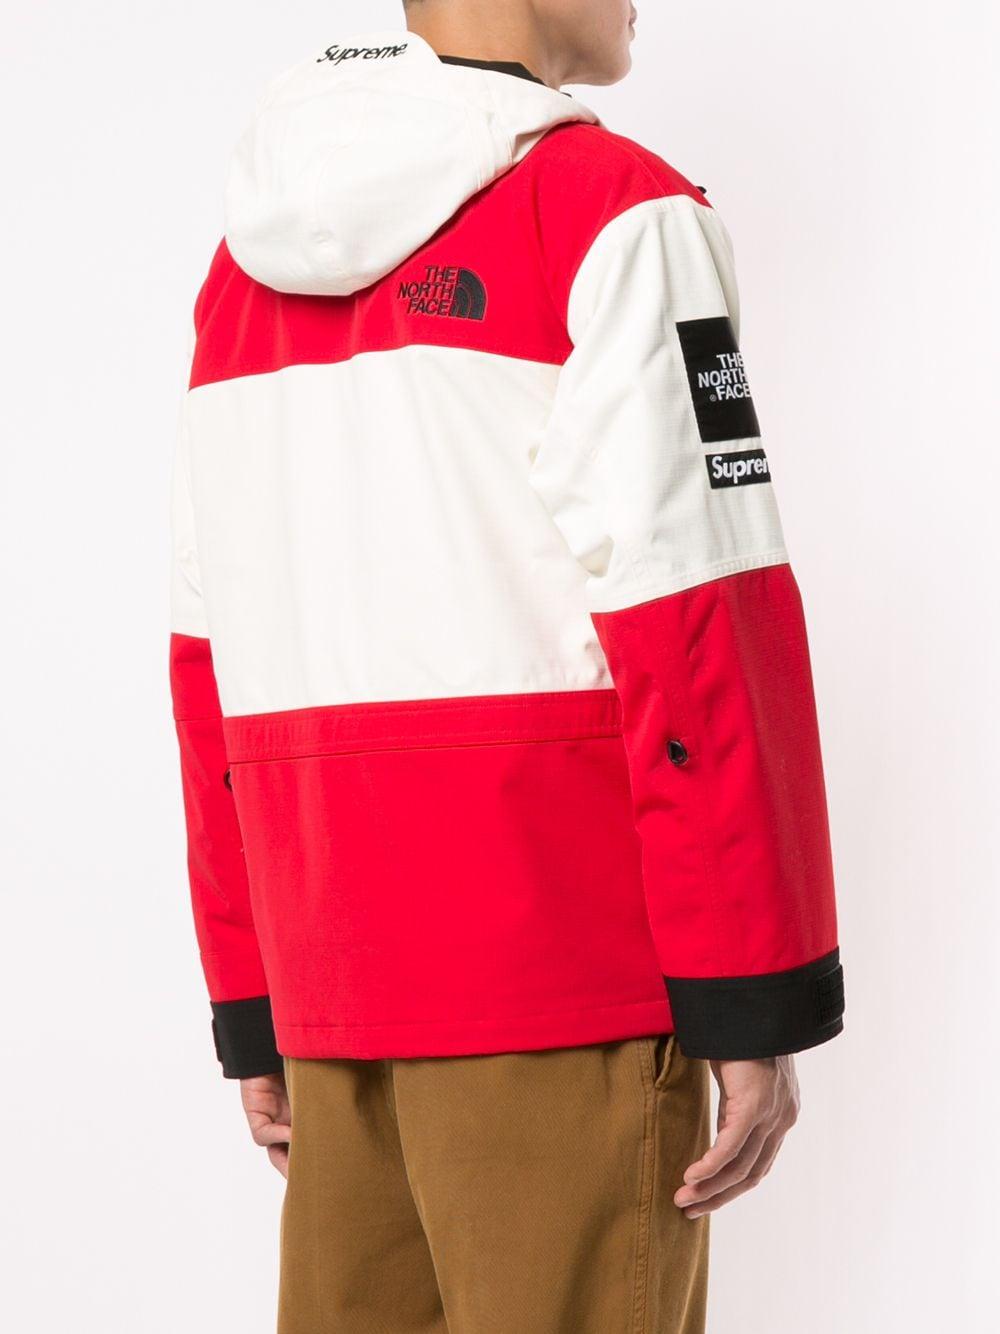 Supreme X The North Face Expedition Jacket in Red for Men - Lyst